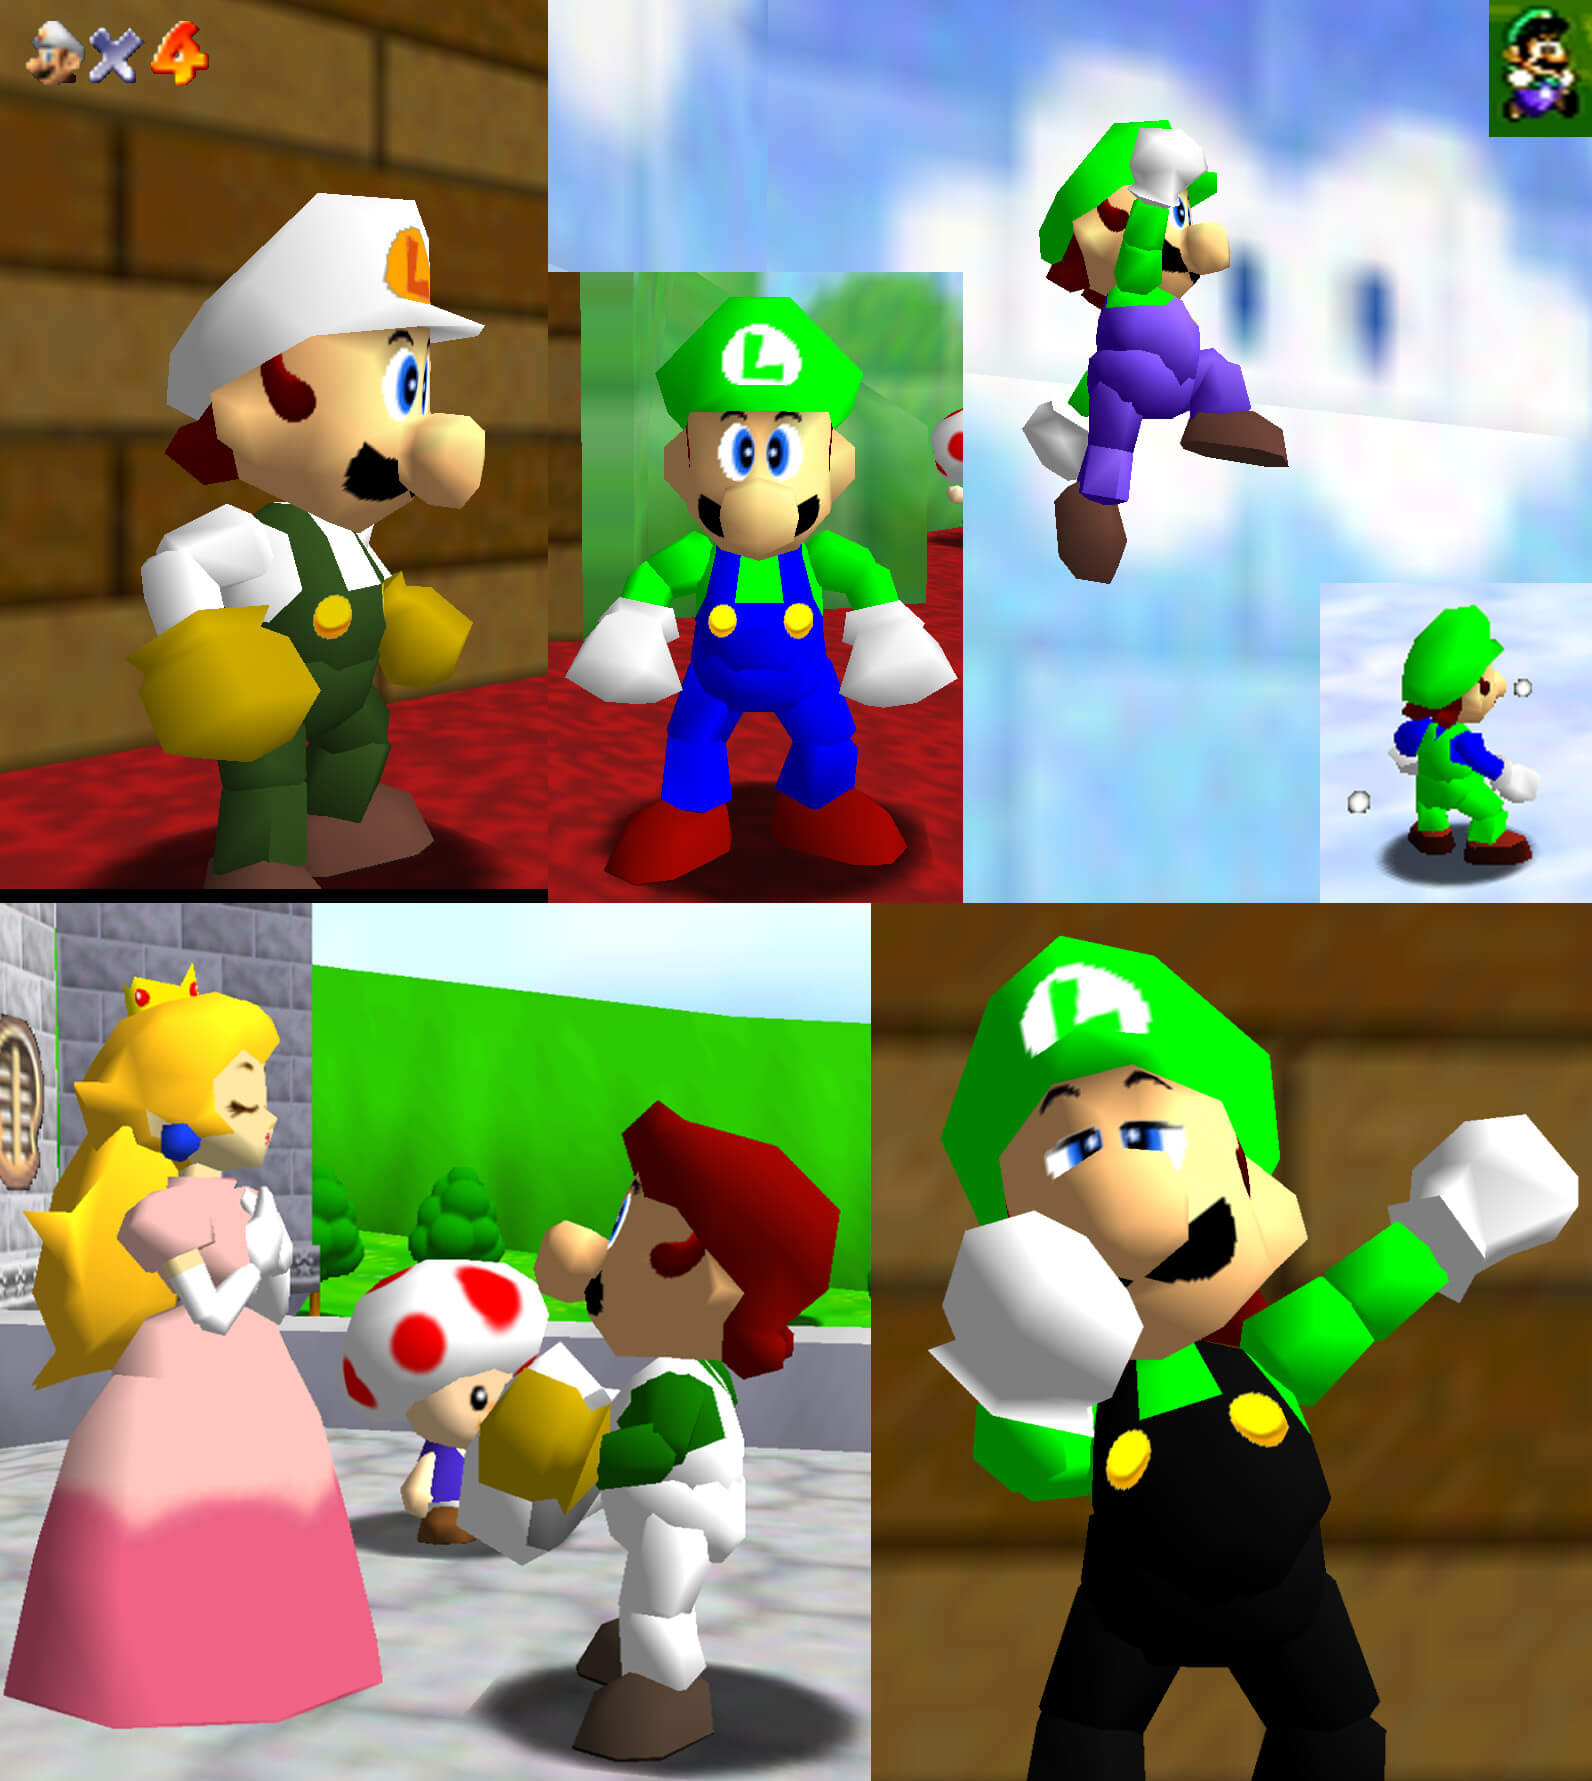 Super Luigi 64 is a must-have mod for Super Mario 64, available now